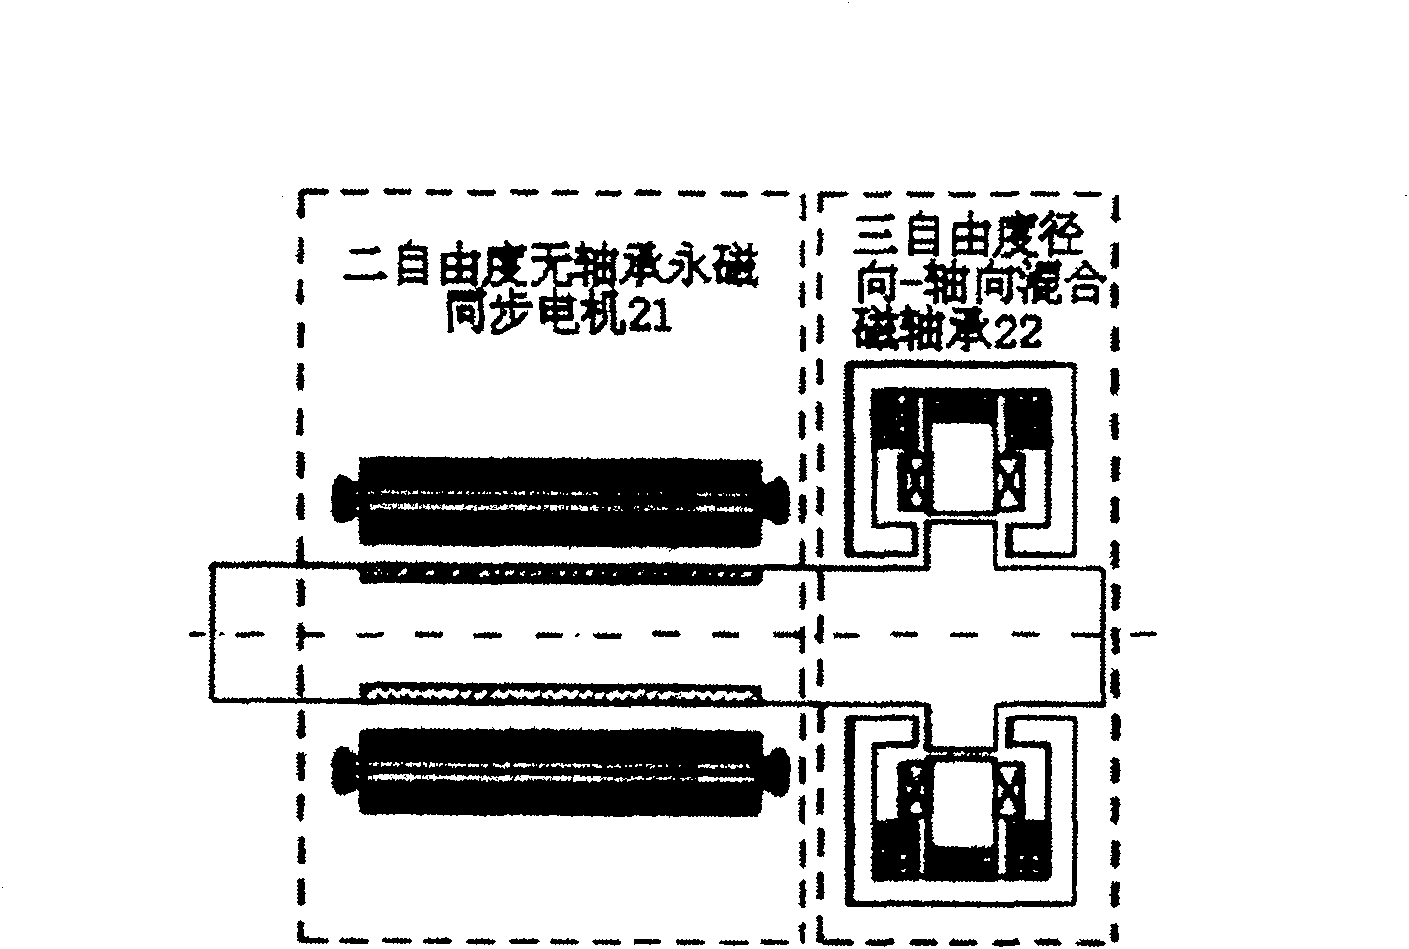 Nerval net based inverse control system for permanent-magnet synchronous motor with five degrees of freedom without bearing, and control method